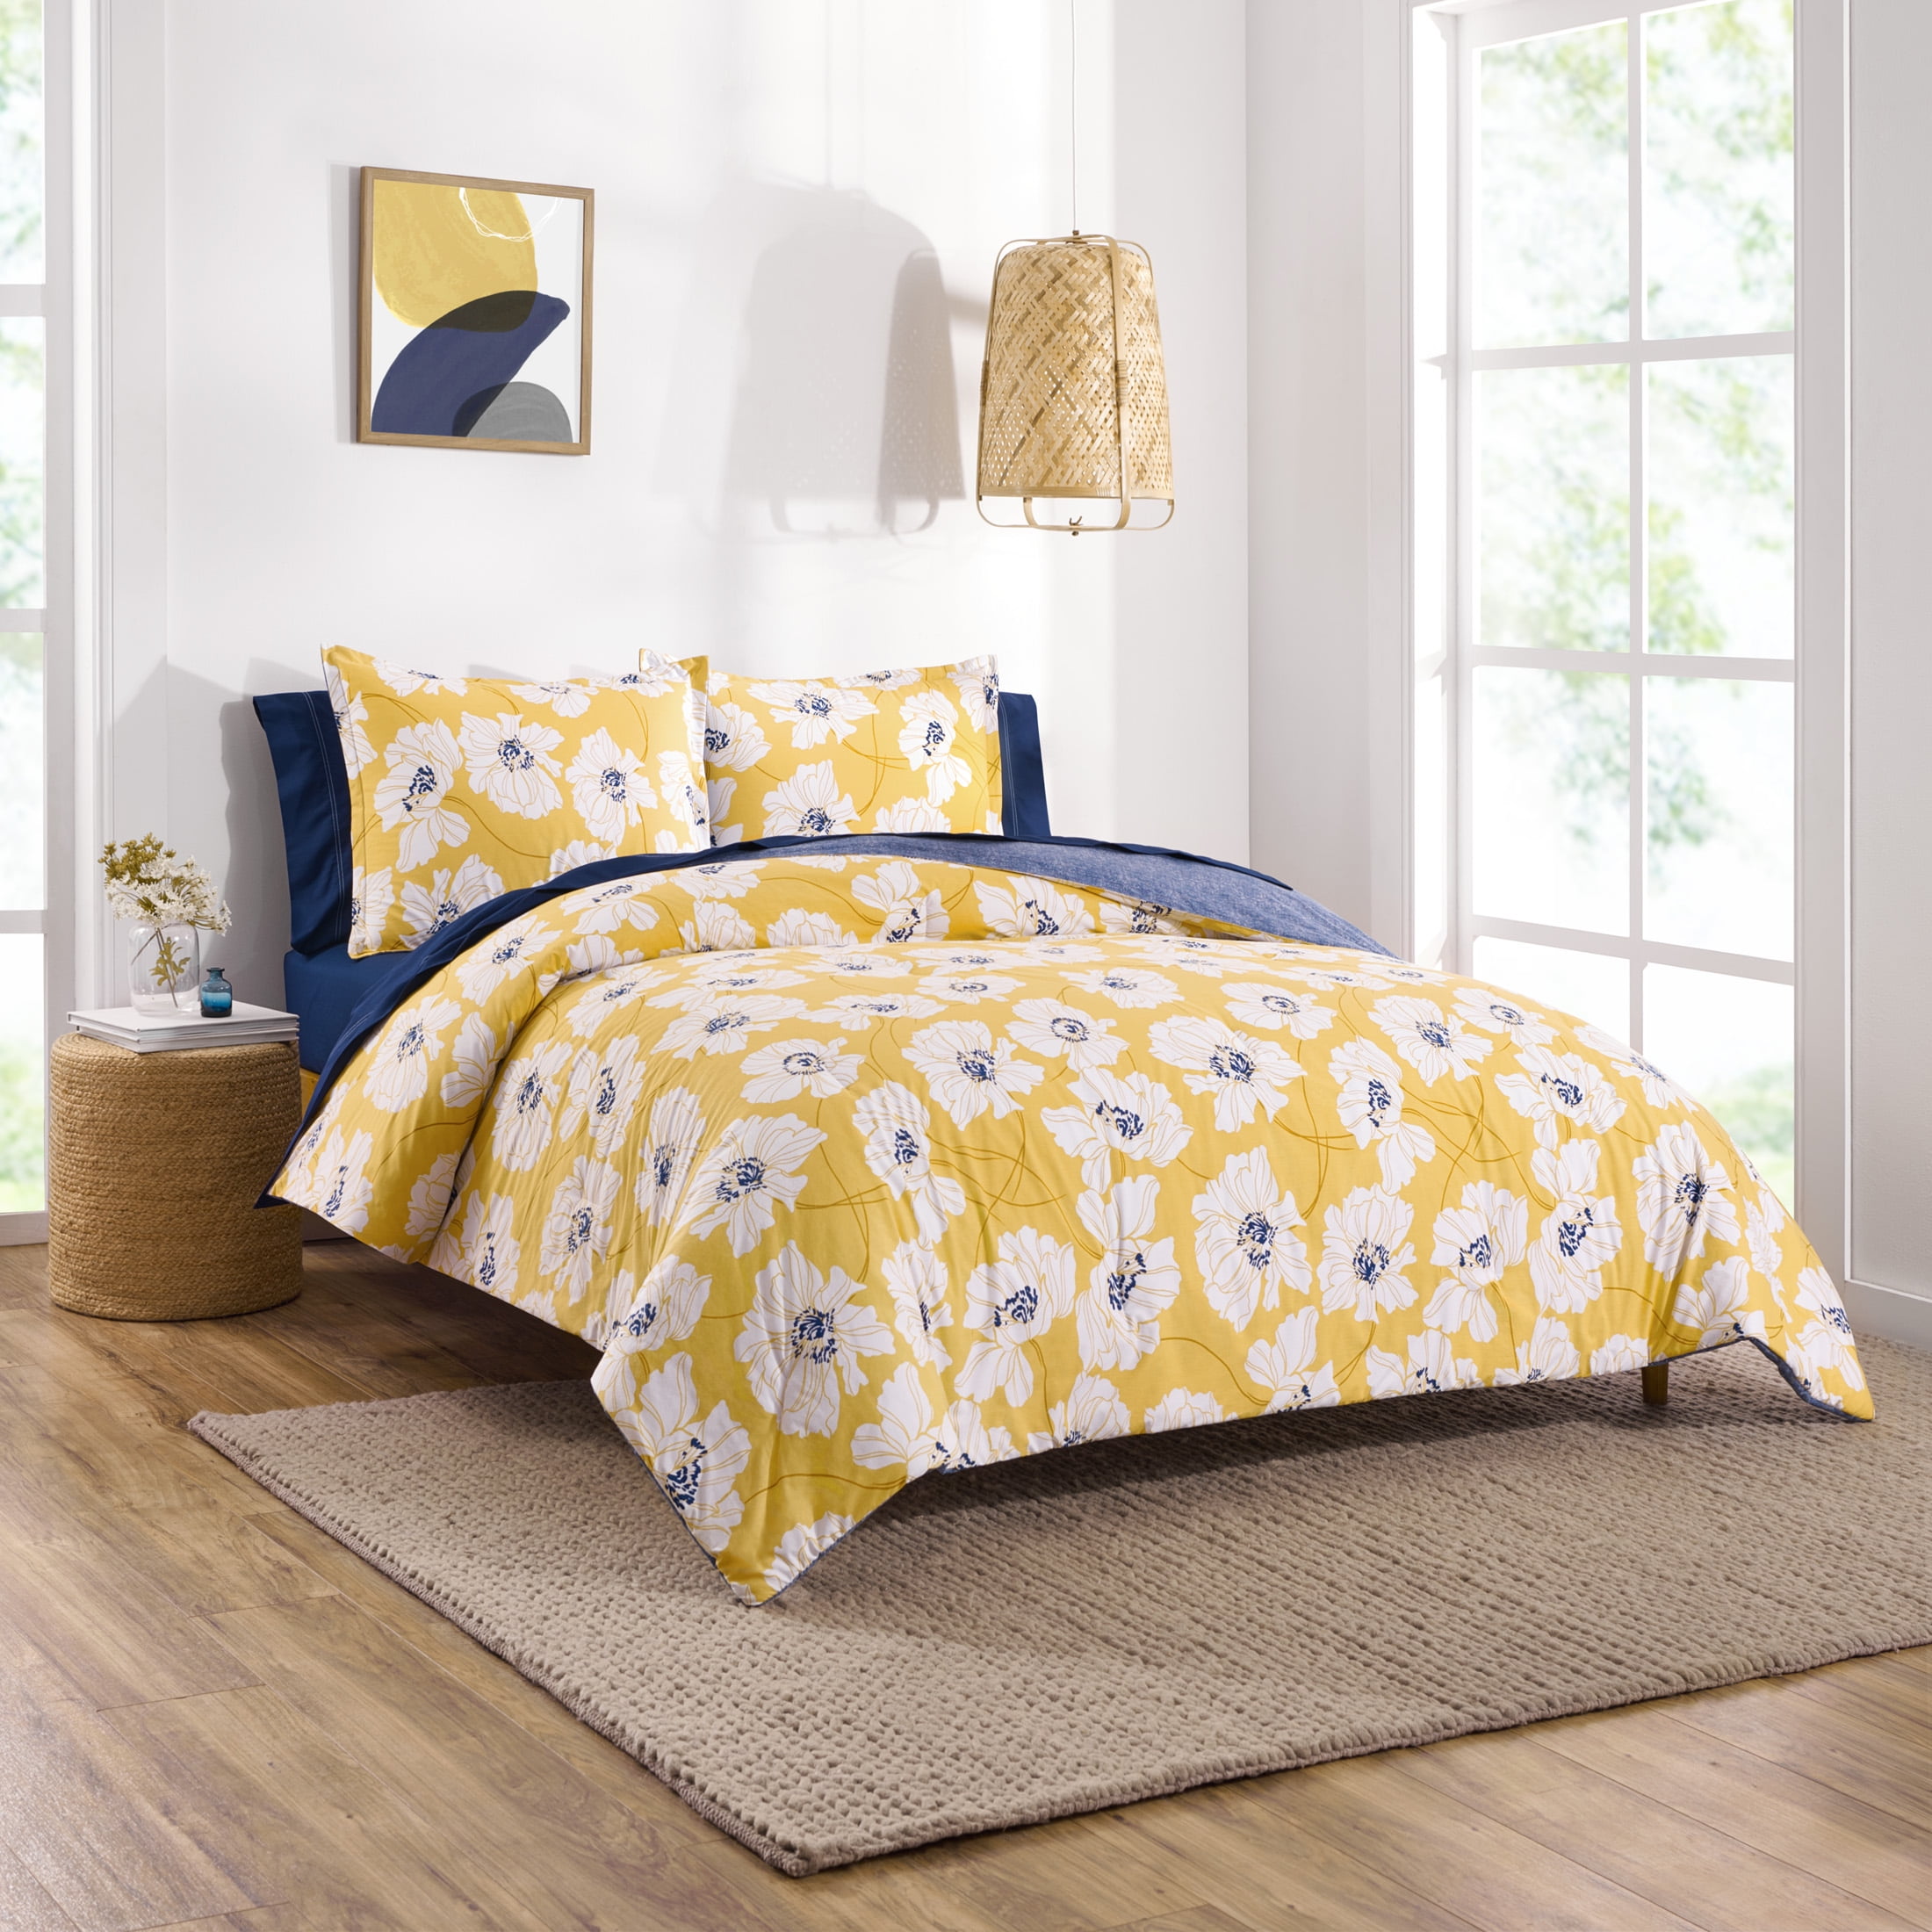 BEAUTIFUL MODERN CHIC GREY YELLOW WHITE FLORAL FLOWER TEXTURE SOFT QUILT SET 